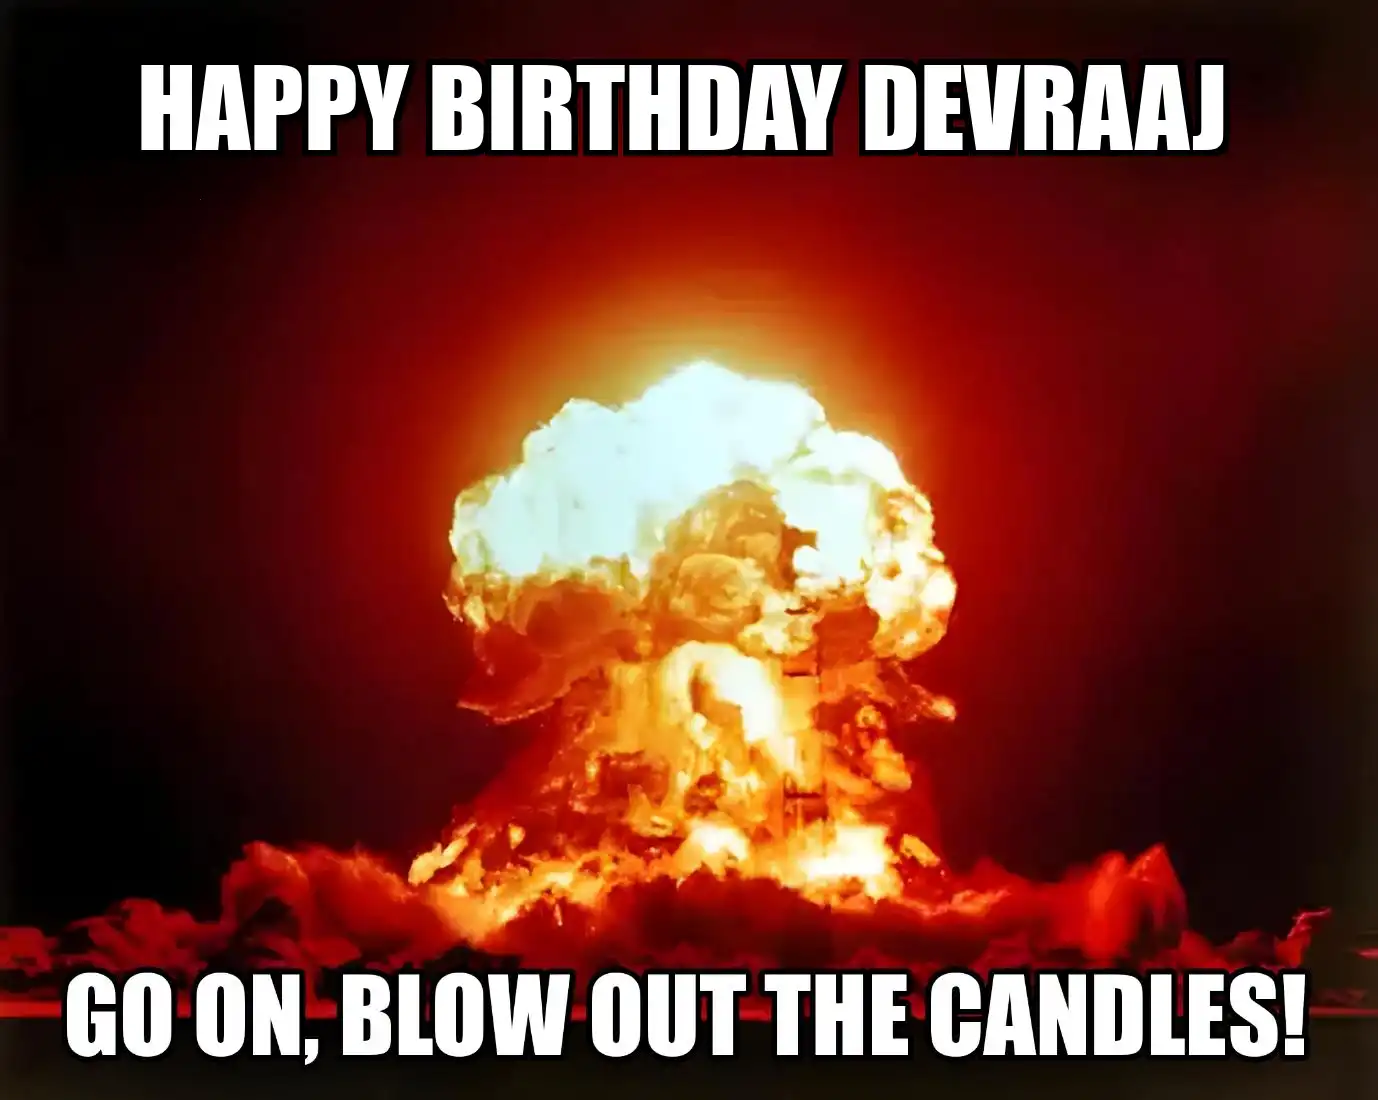 Happy Birthday Devraaj Go On Blow Out The Candles Meme